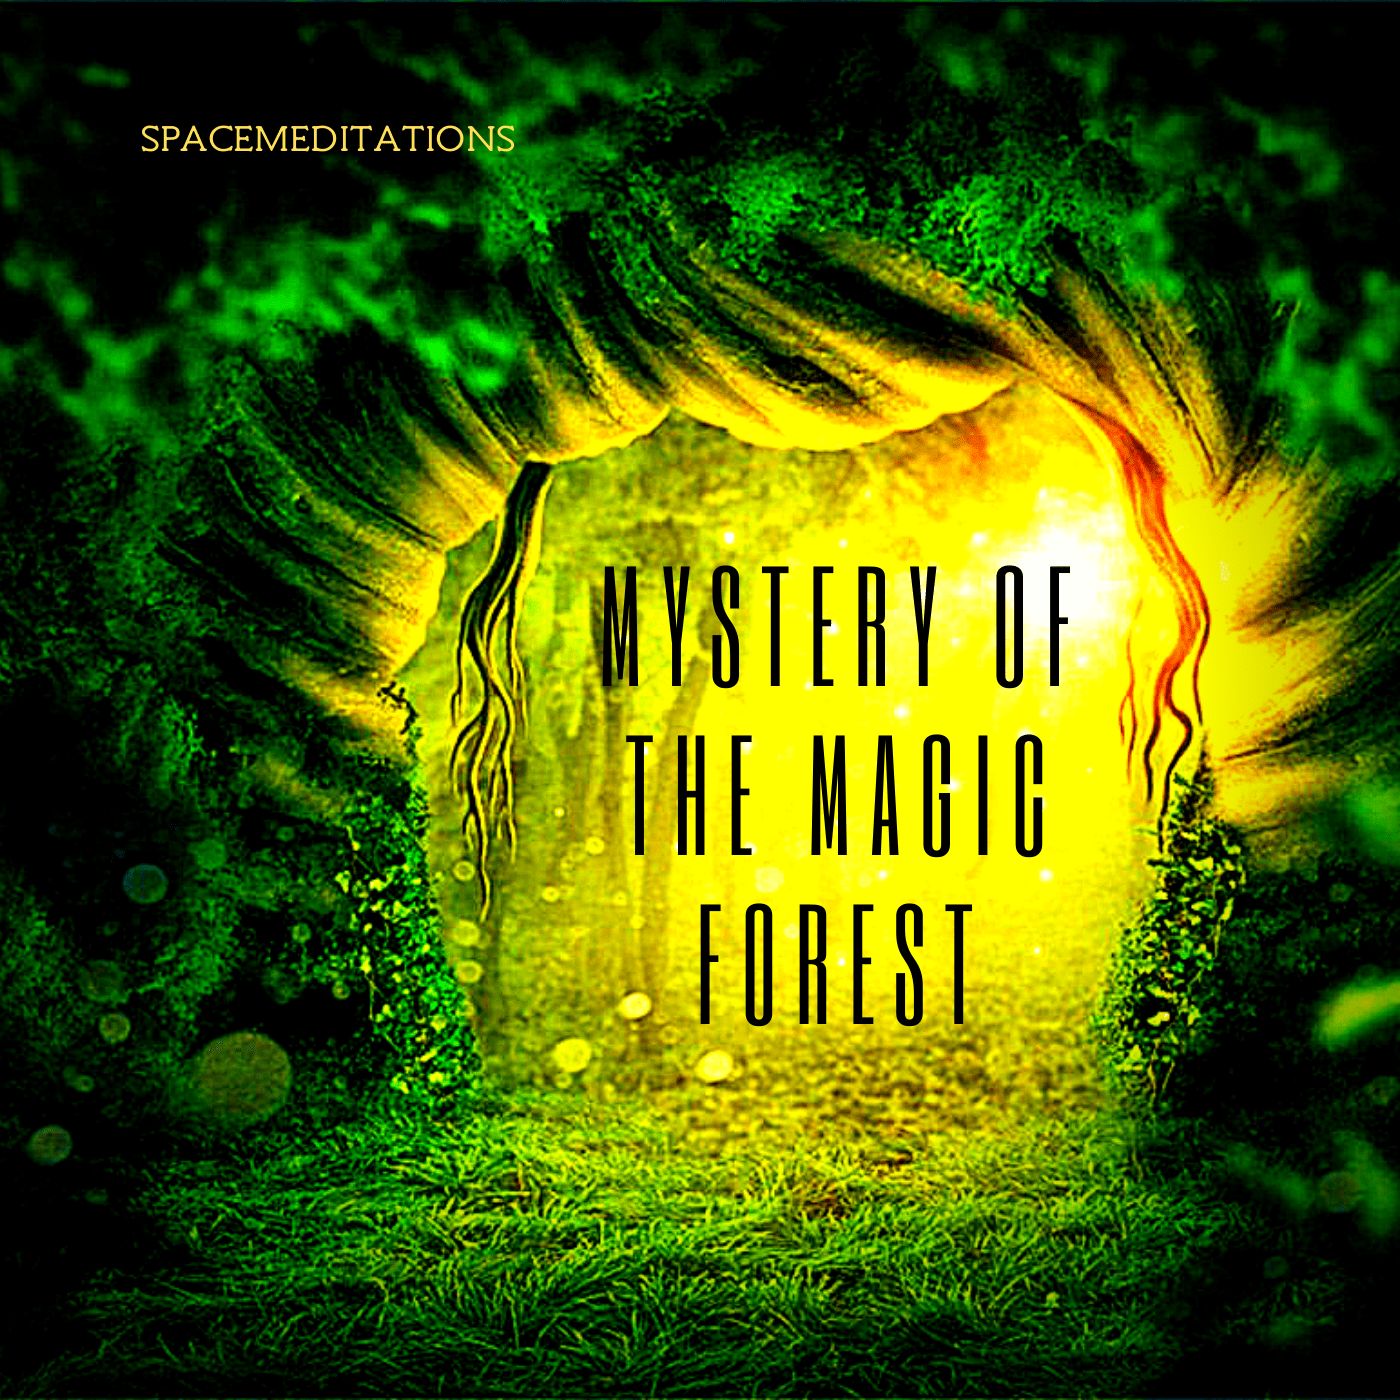 Mystery of the magic forest. Spacemeditations